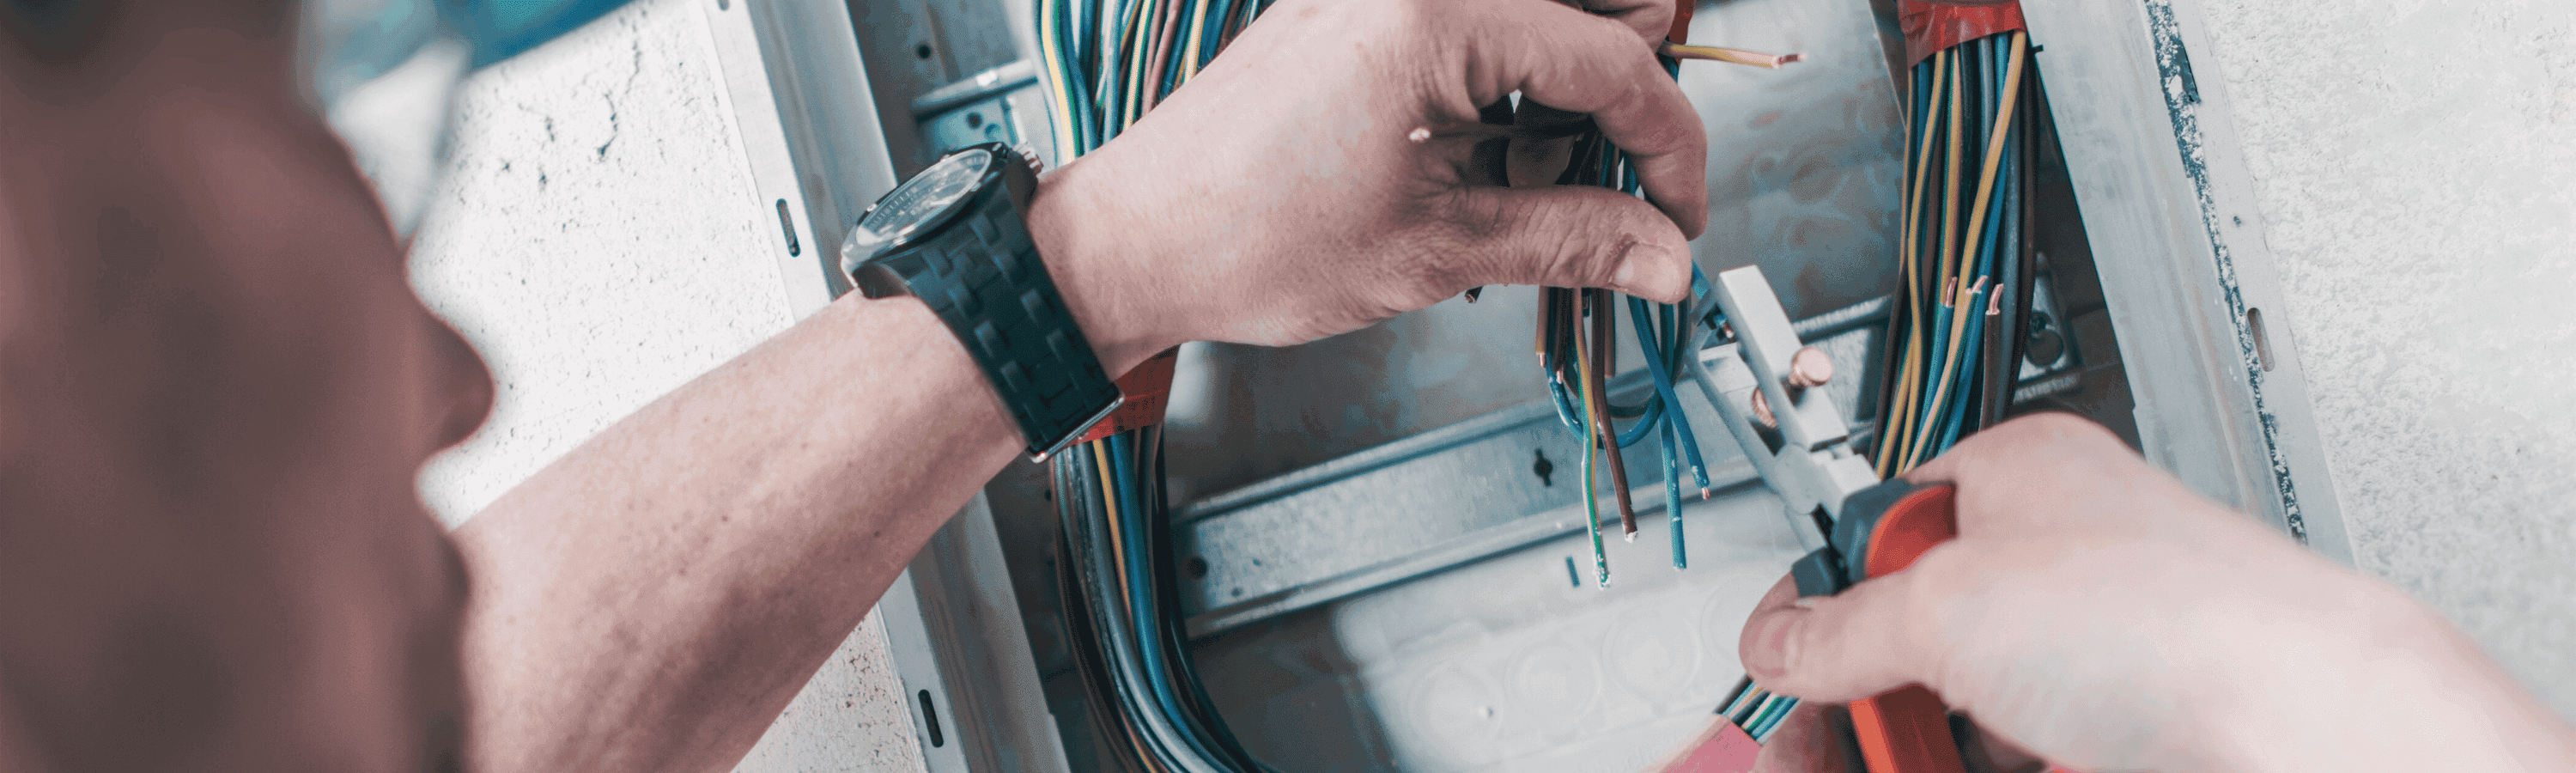 Electrician fixing electrical wirings 